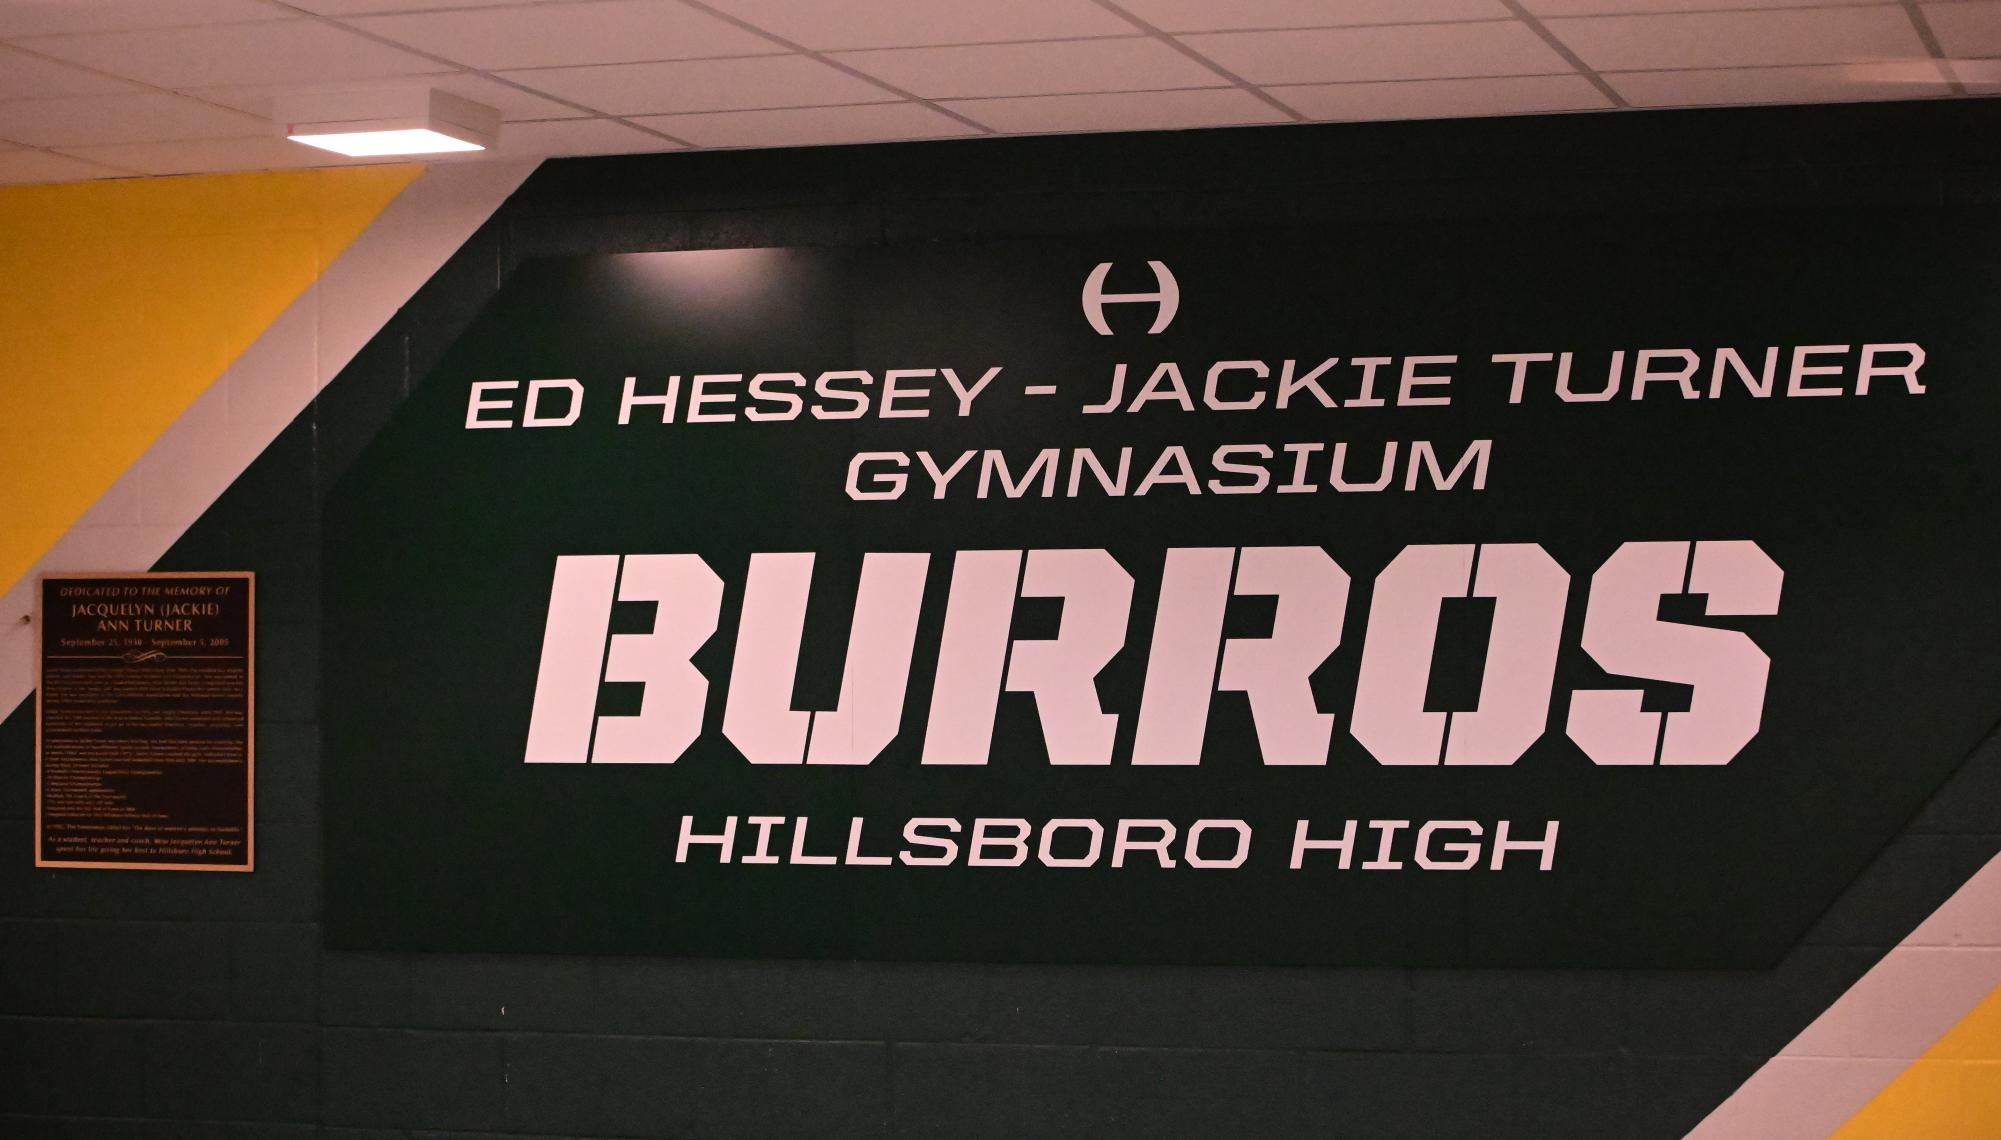 Hillsboro+High+School+adds+Jackie+Turner+during+the+naming+of+the+gymnasium